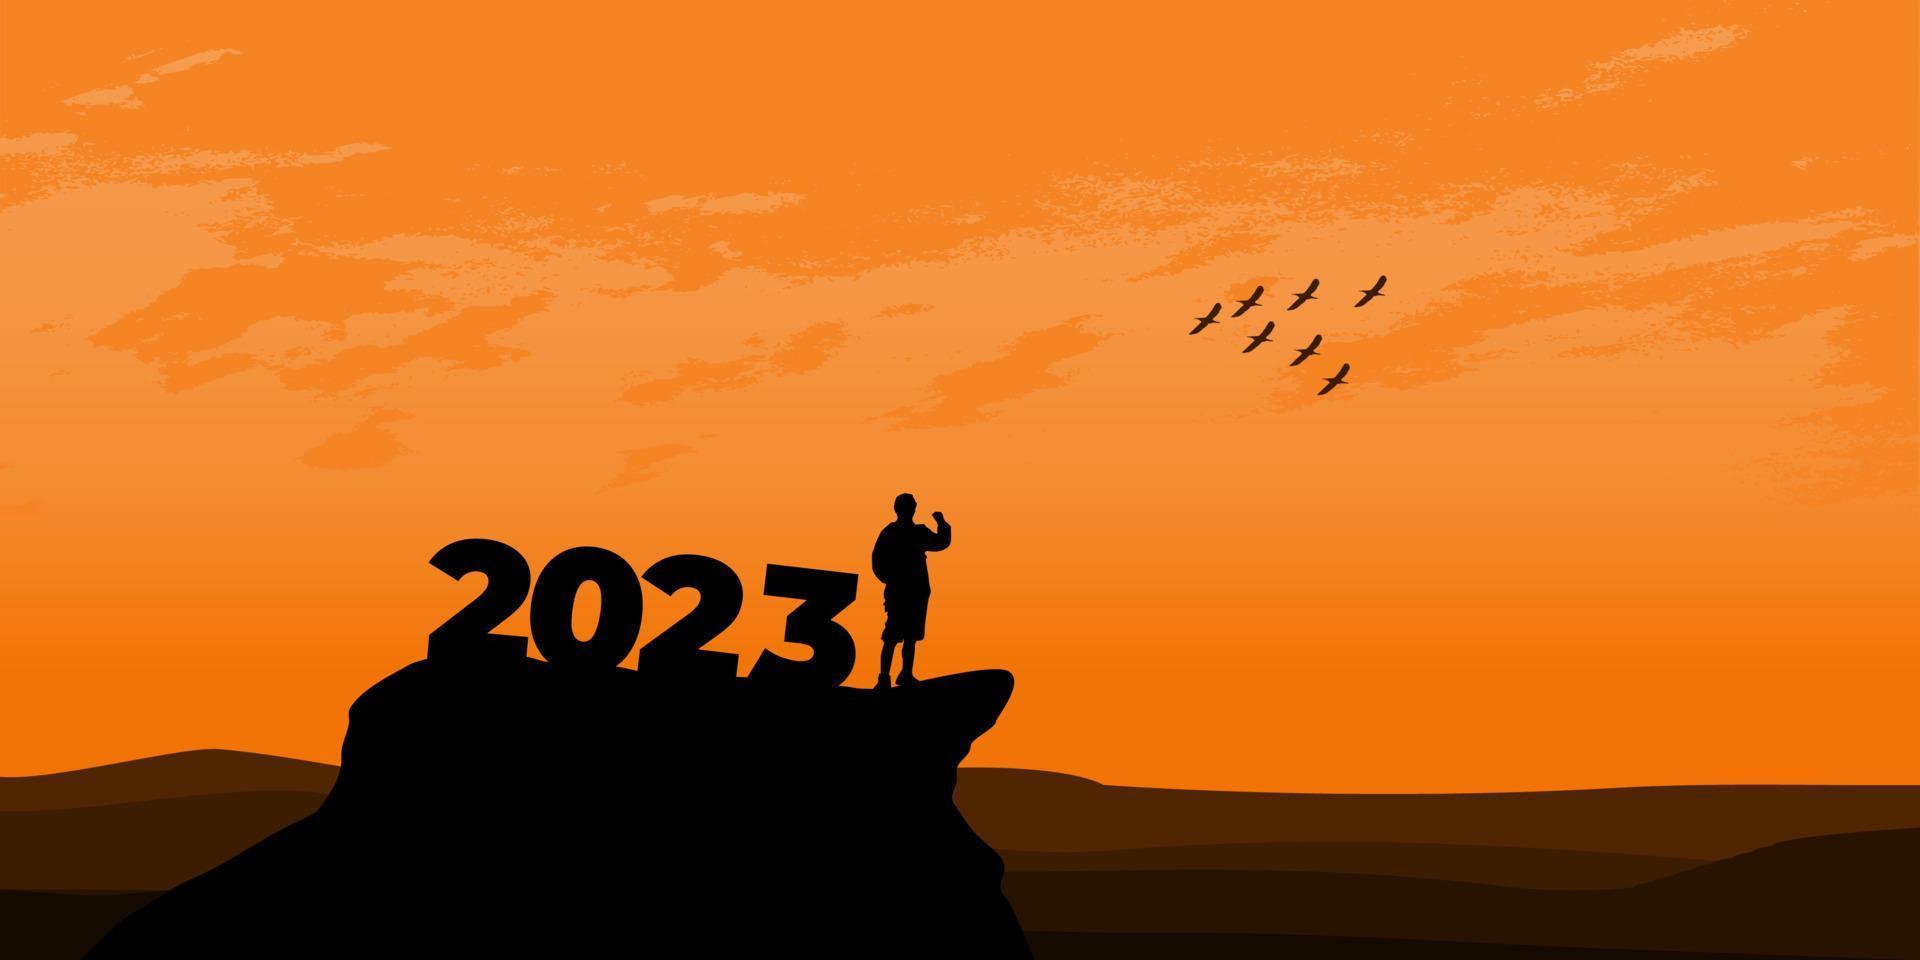 New Year 2023 concept. Man meets dawn in mountains for new year 2023. New Start motivation inspirational quote message on silhouette man vector